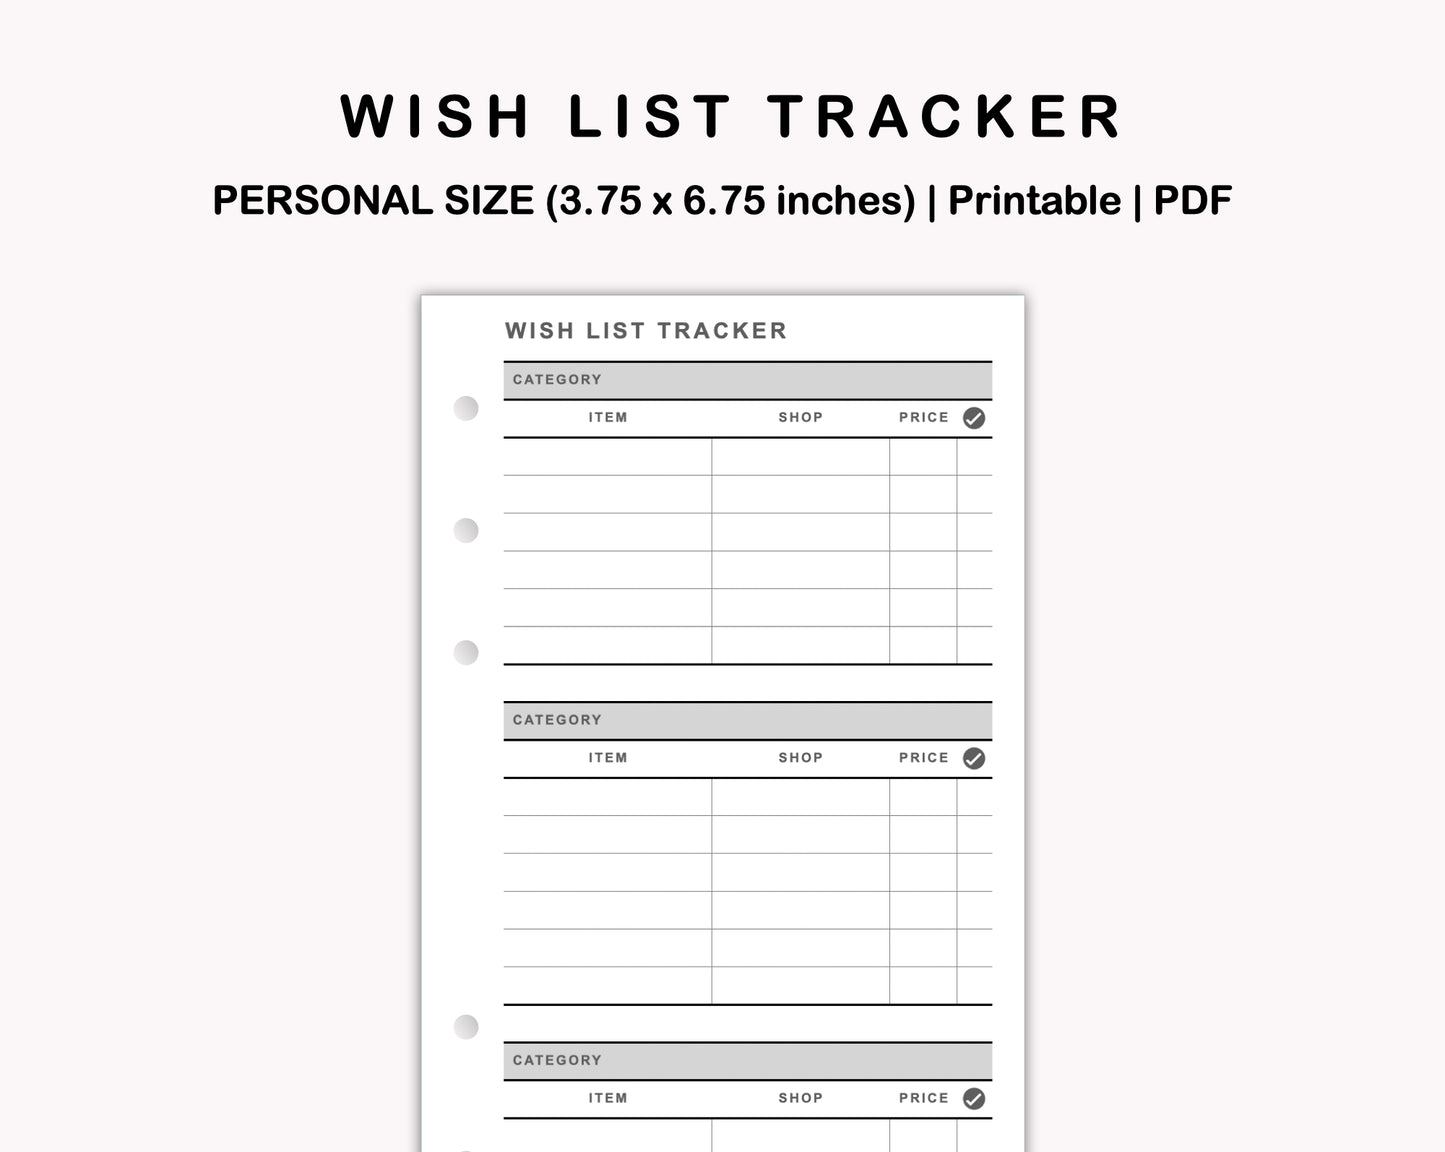 Personal Inserts - Wish List Tracker by Category